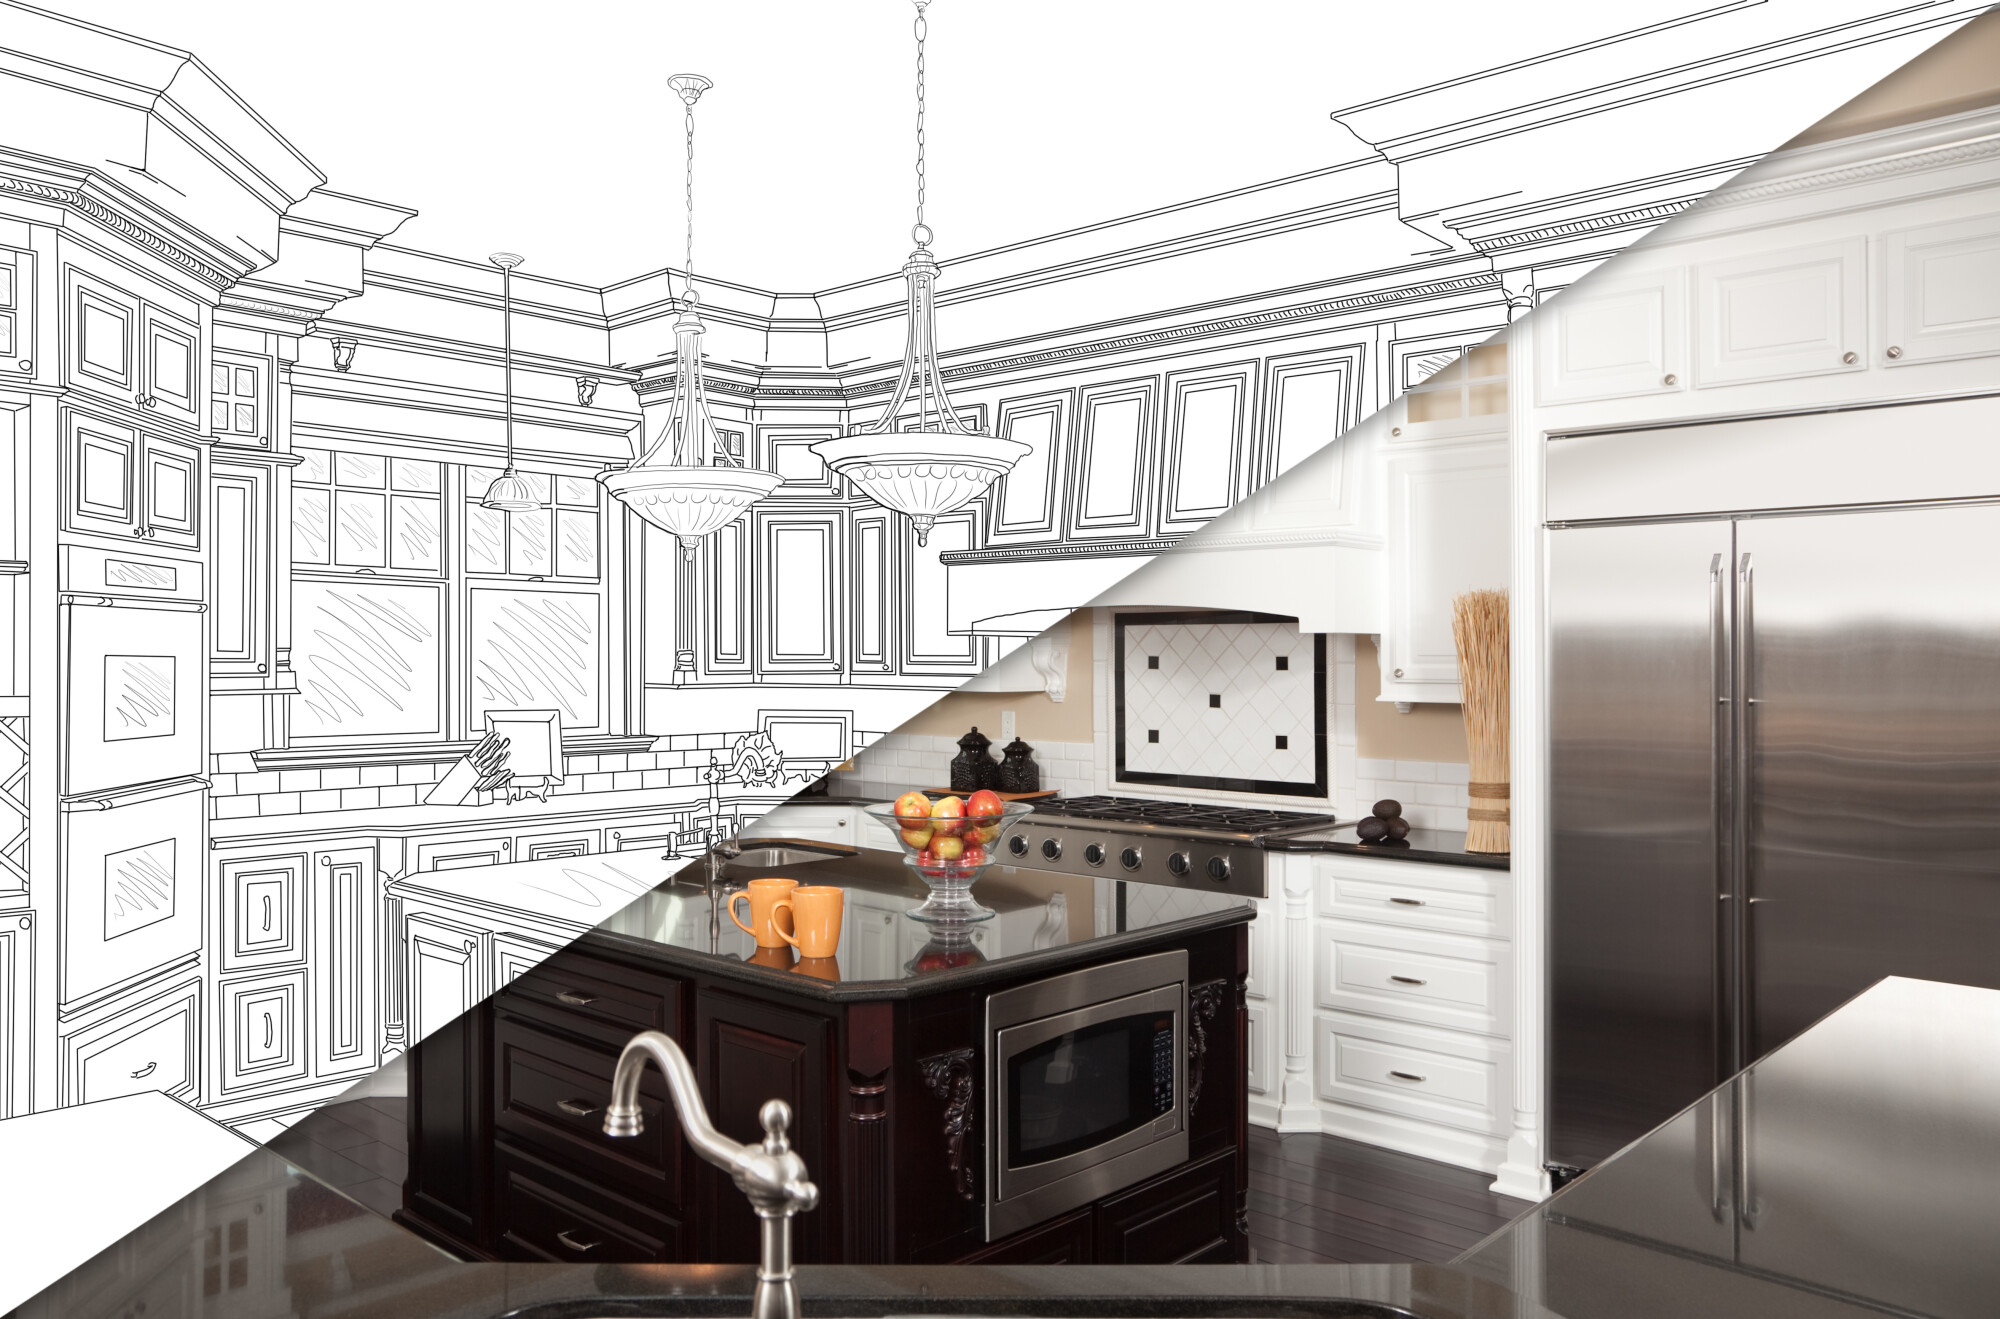 Finding the right professional to update your kitchen requires knowing your options. Here are factors to consider when hiring a kitchen remodeling company.b02b604591418df73dfb4a900dc0